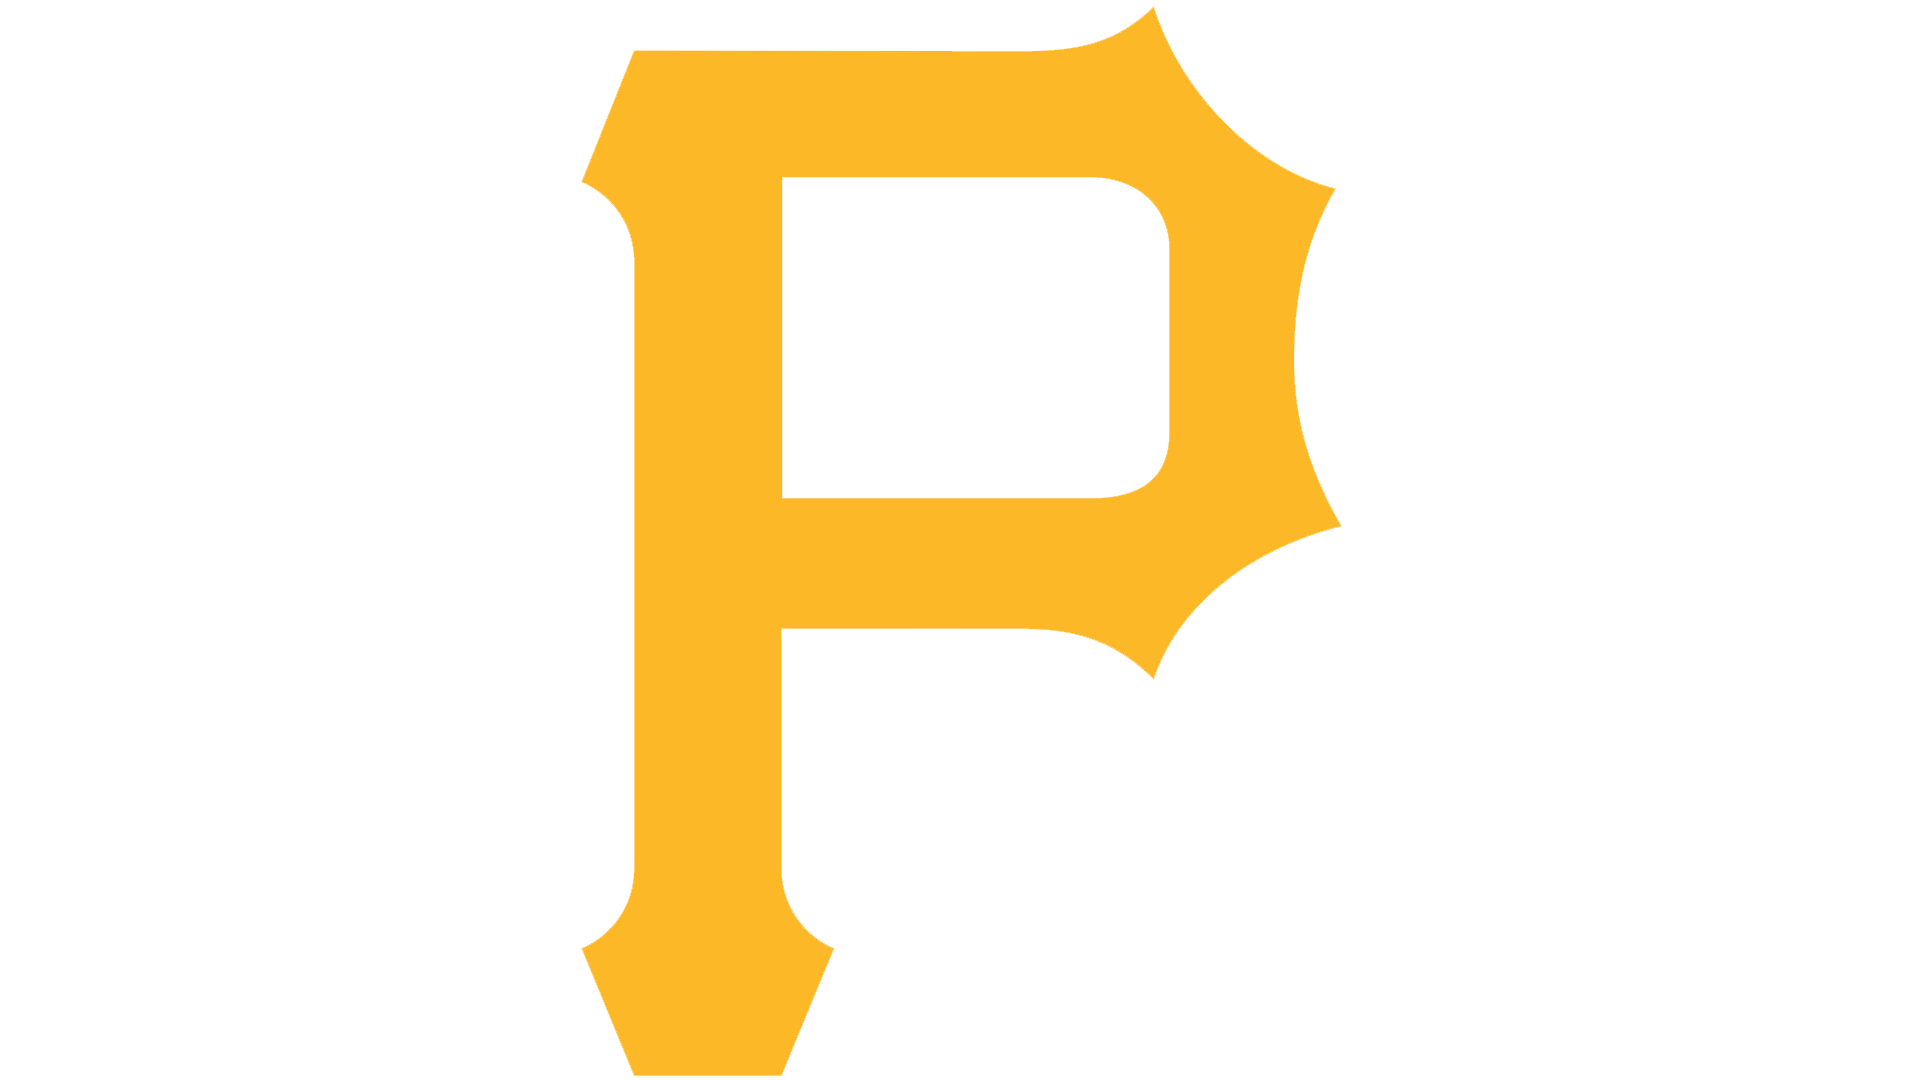 Pirates Logo - Pittsburgh Pirates Logo, Pittsburgh Pirates Symbol, Meaning, History ...